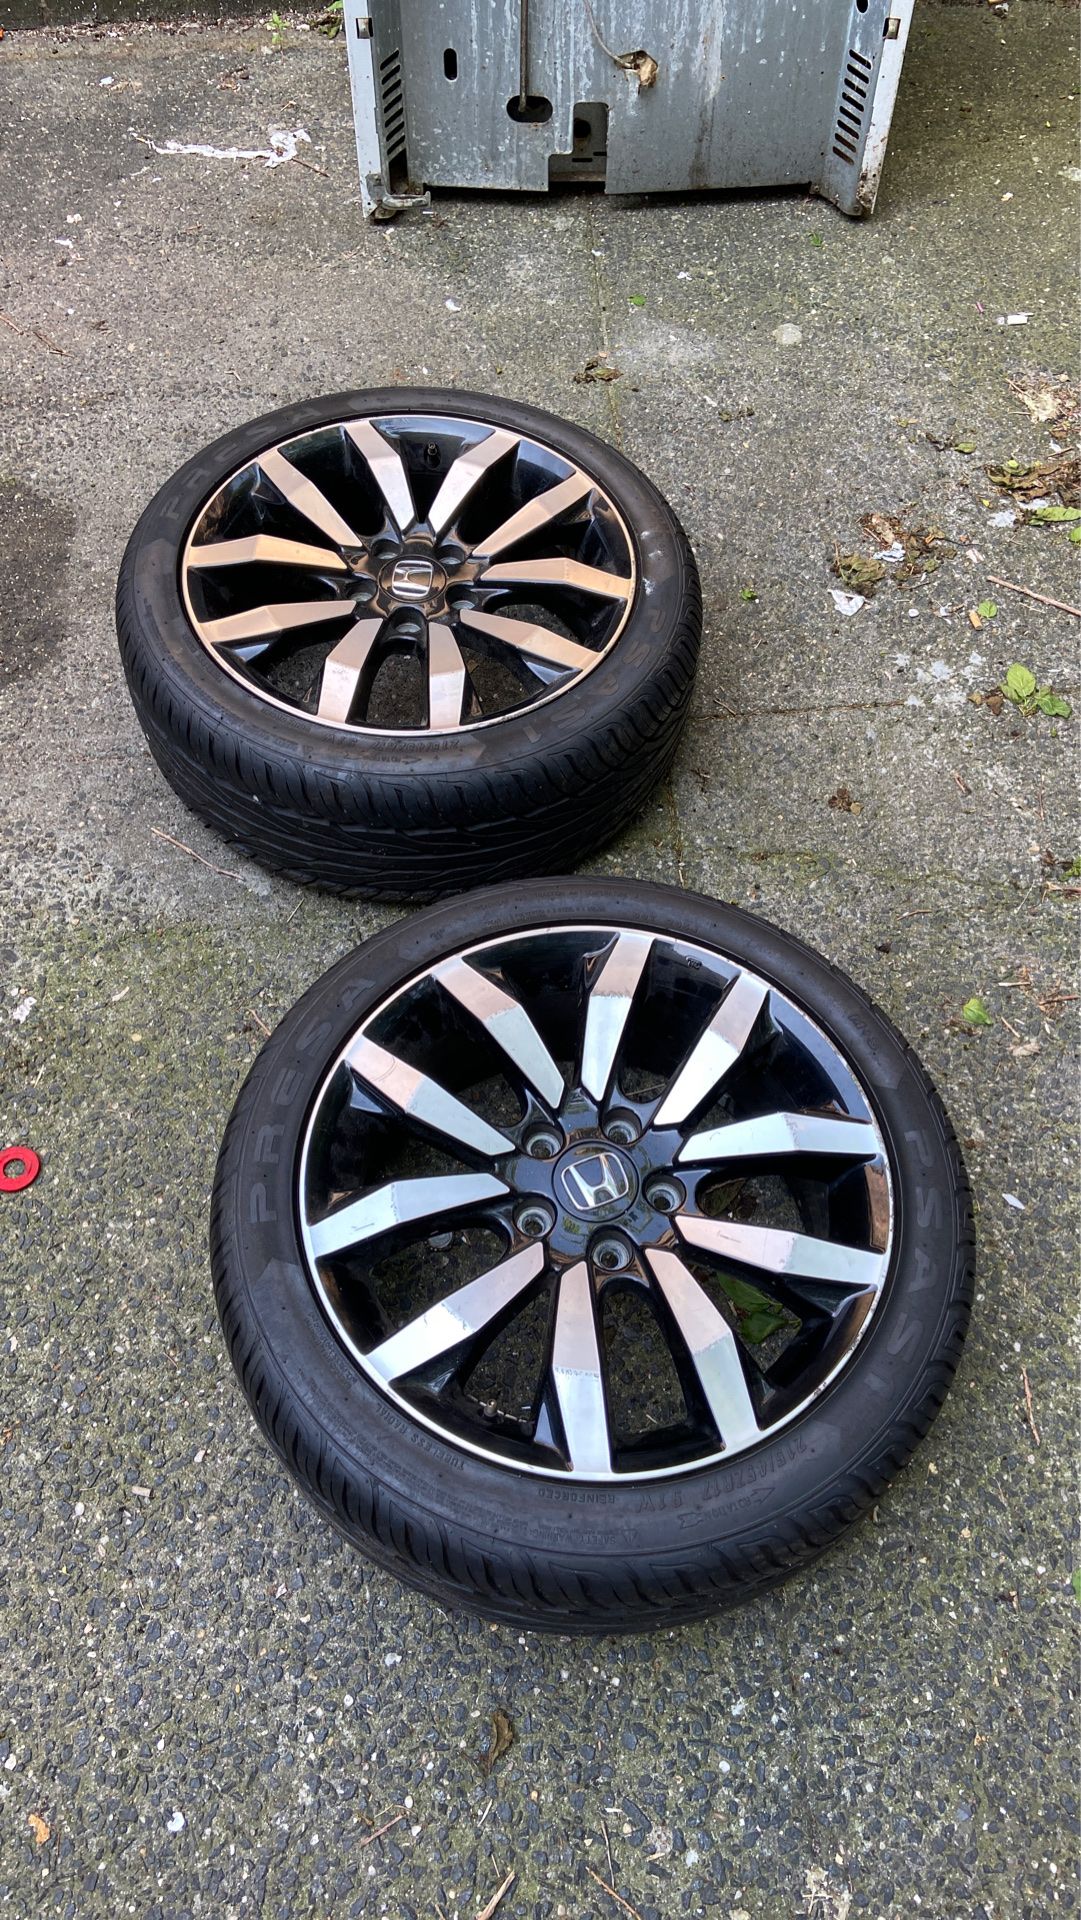 2015 Honda Civic rims I only have two Rims the rims have brand new tires on them